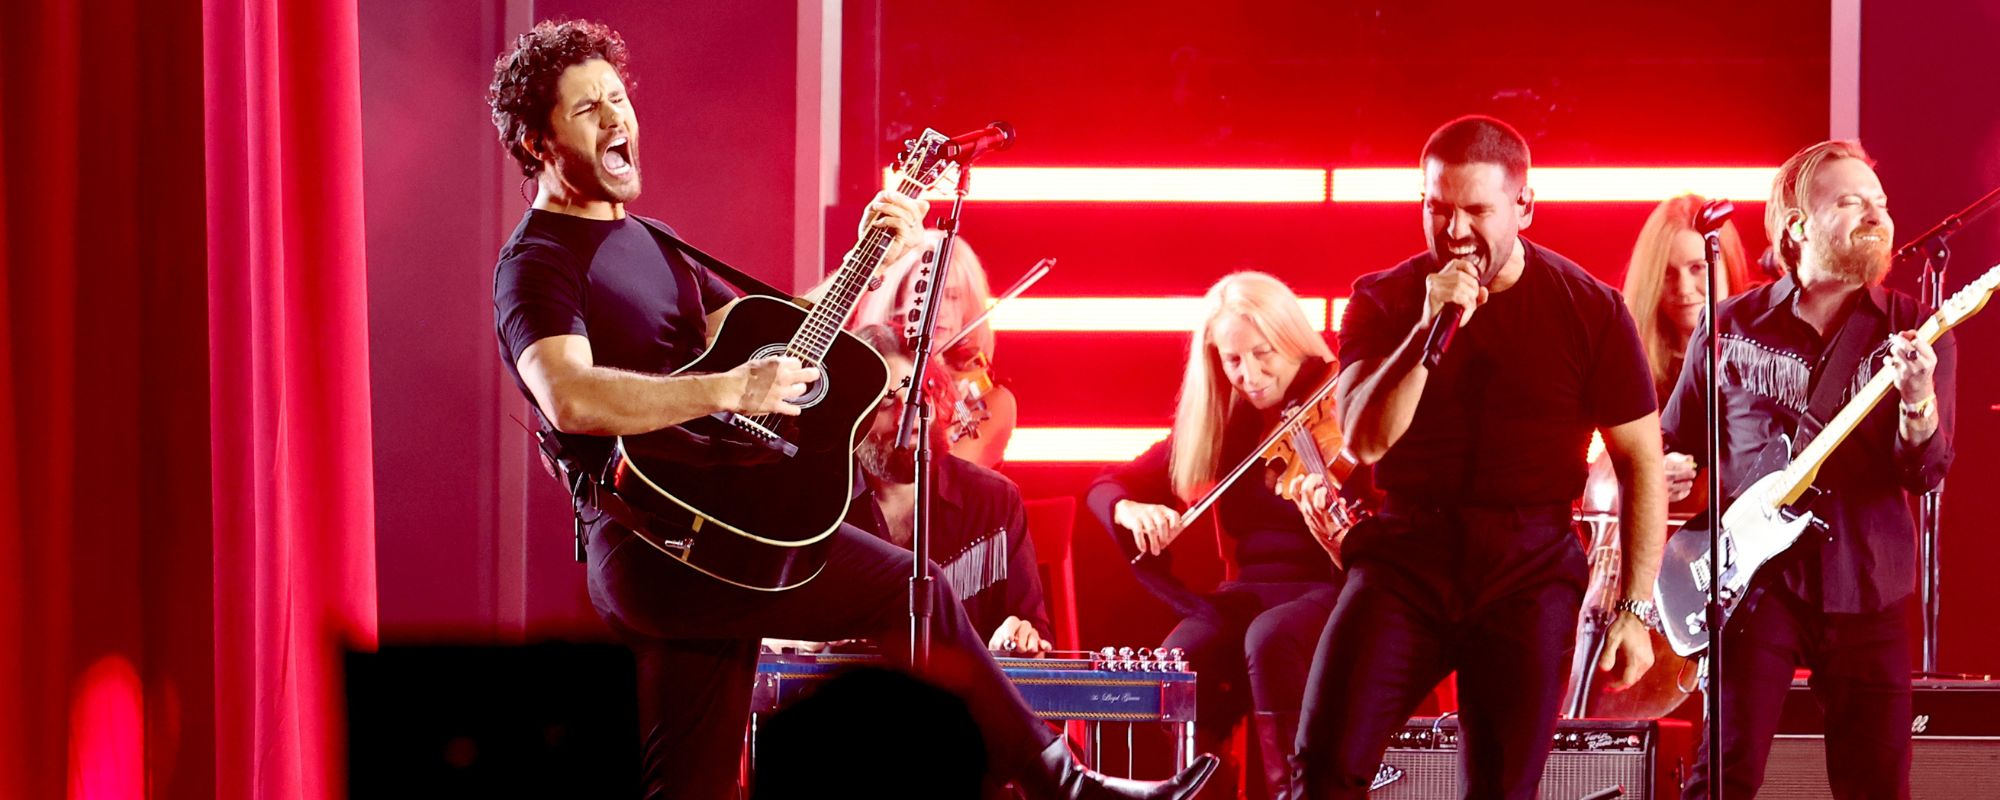 Dan + Shay Are Having a Moment of Triumph on ‘The Voice’—Right as They’re Set To Leave the Show